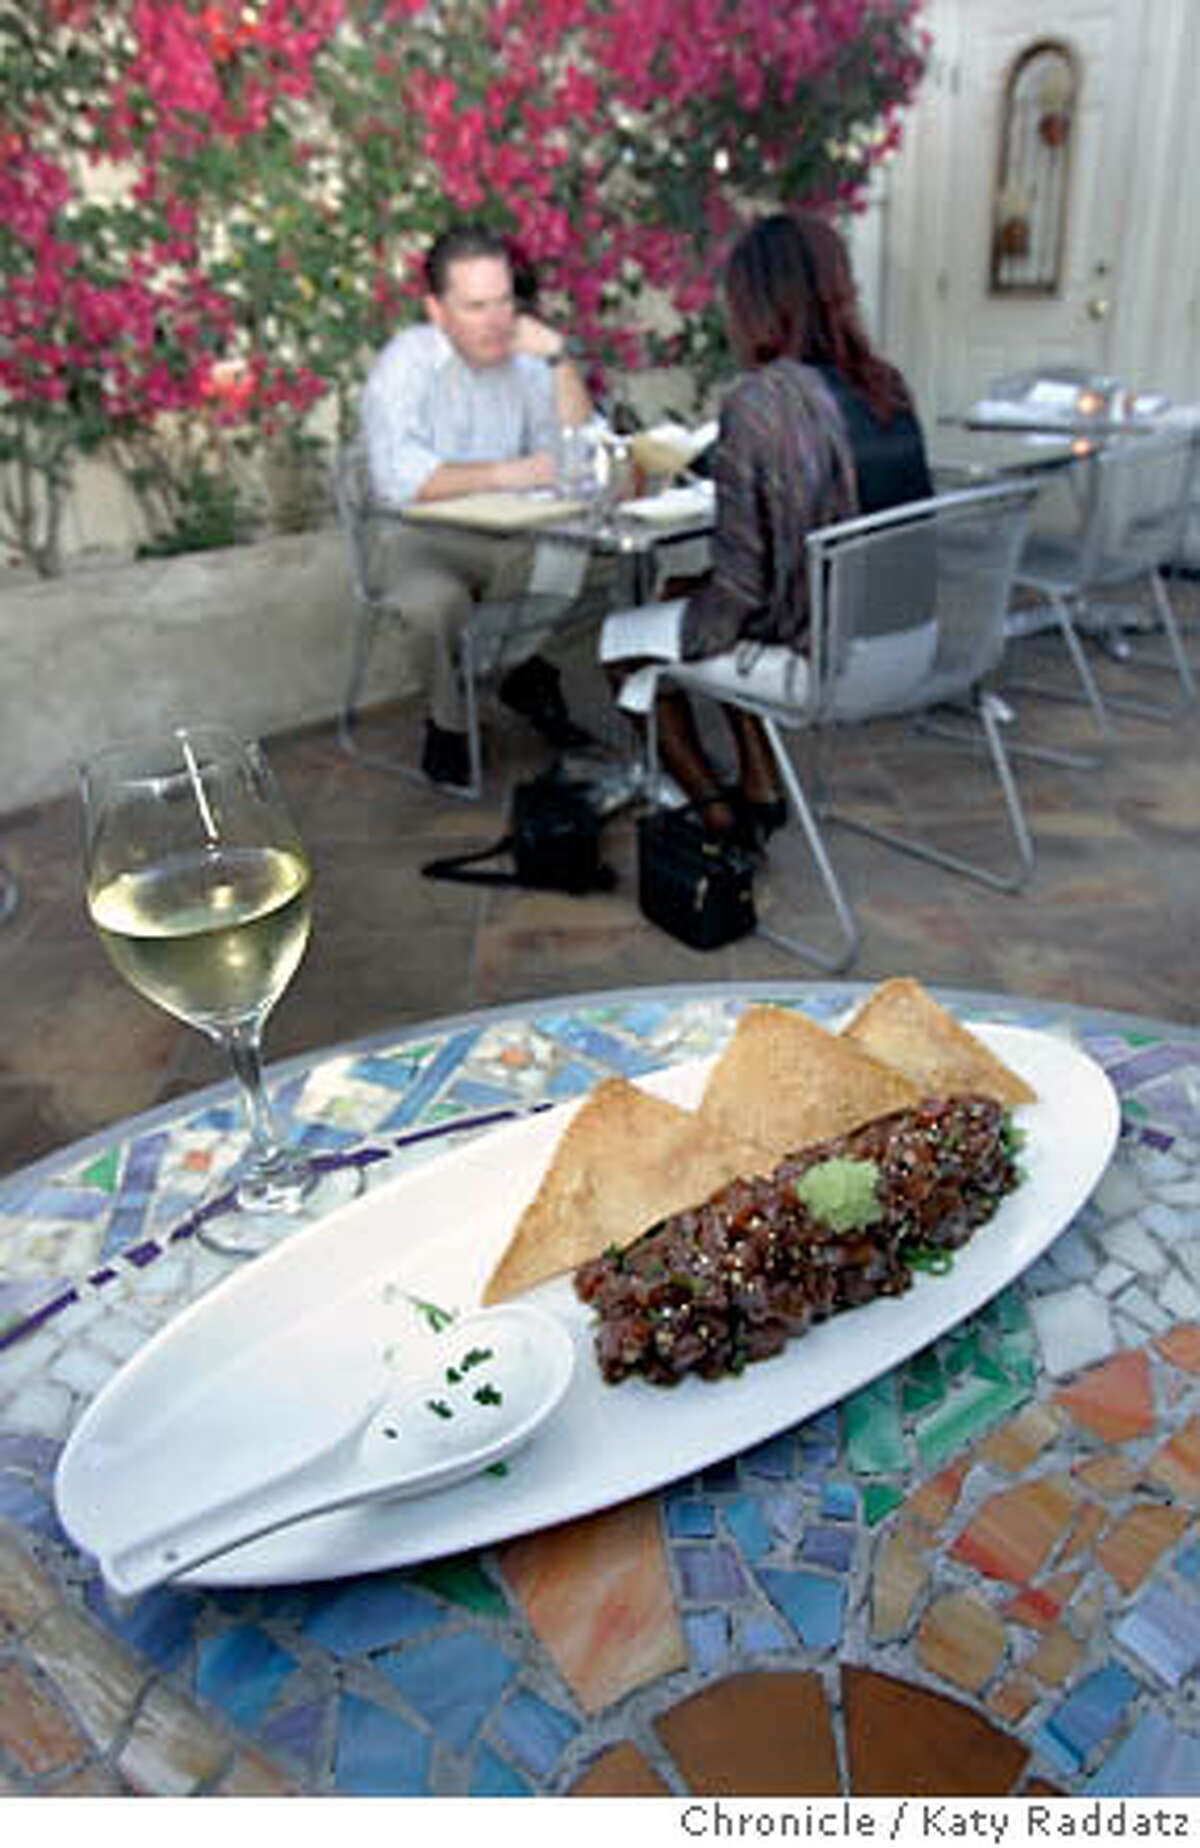 DINE06_WARDSTREETCAFE_020_RAD.jpg SHOWN: The Ward Street Cafe in Larkspur, CA. A favored dish is the Tuna Tartare with wasabi tobiko and wasabi creme fraiche. The wine is a California Pinot Gris. These photos were shot in Larkspur, CA. on Wednesday, Aug. 30, 2006. (Katy Raddatz/The S.F.Chronicle) ** Mandatory credit for photographer and the San Francisco Chronicle/ -Mags out